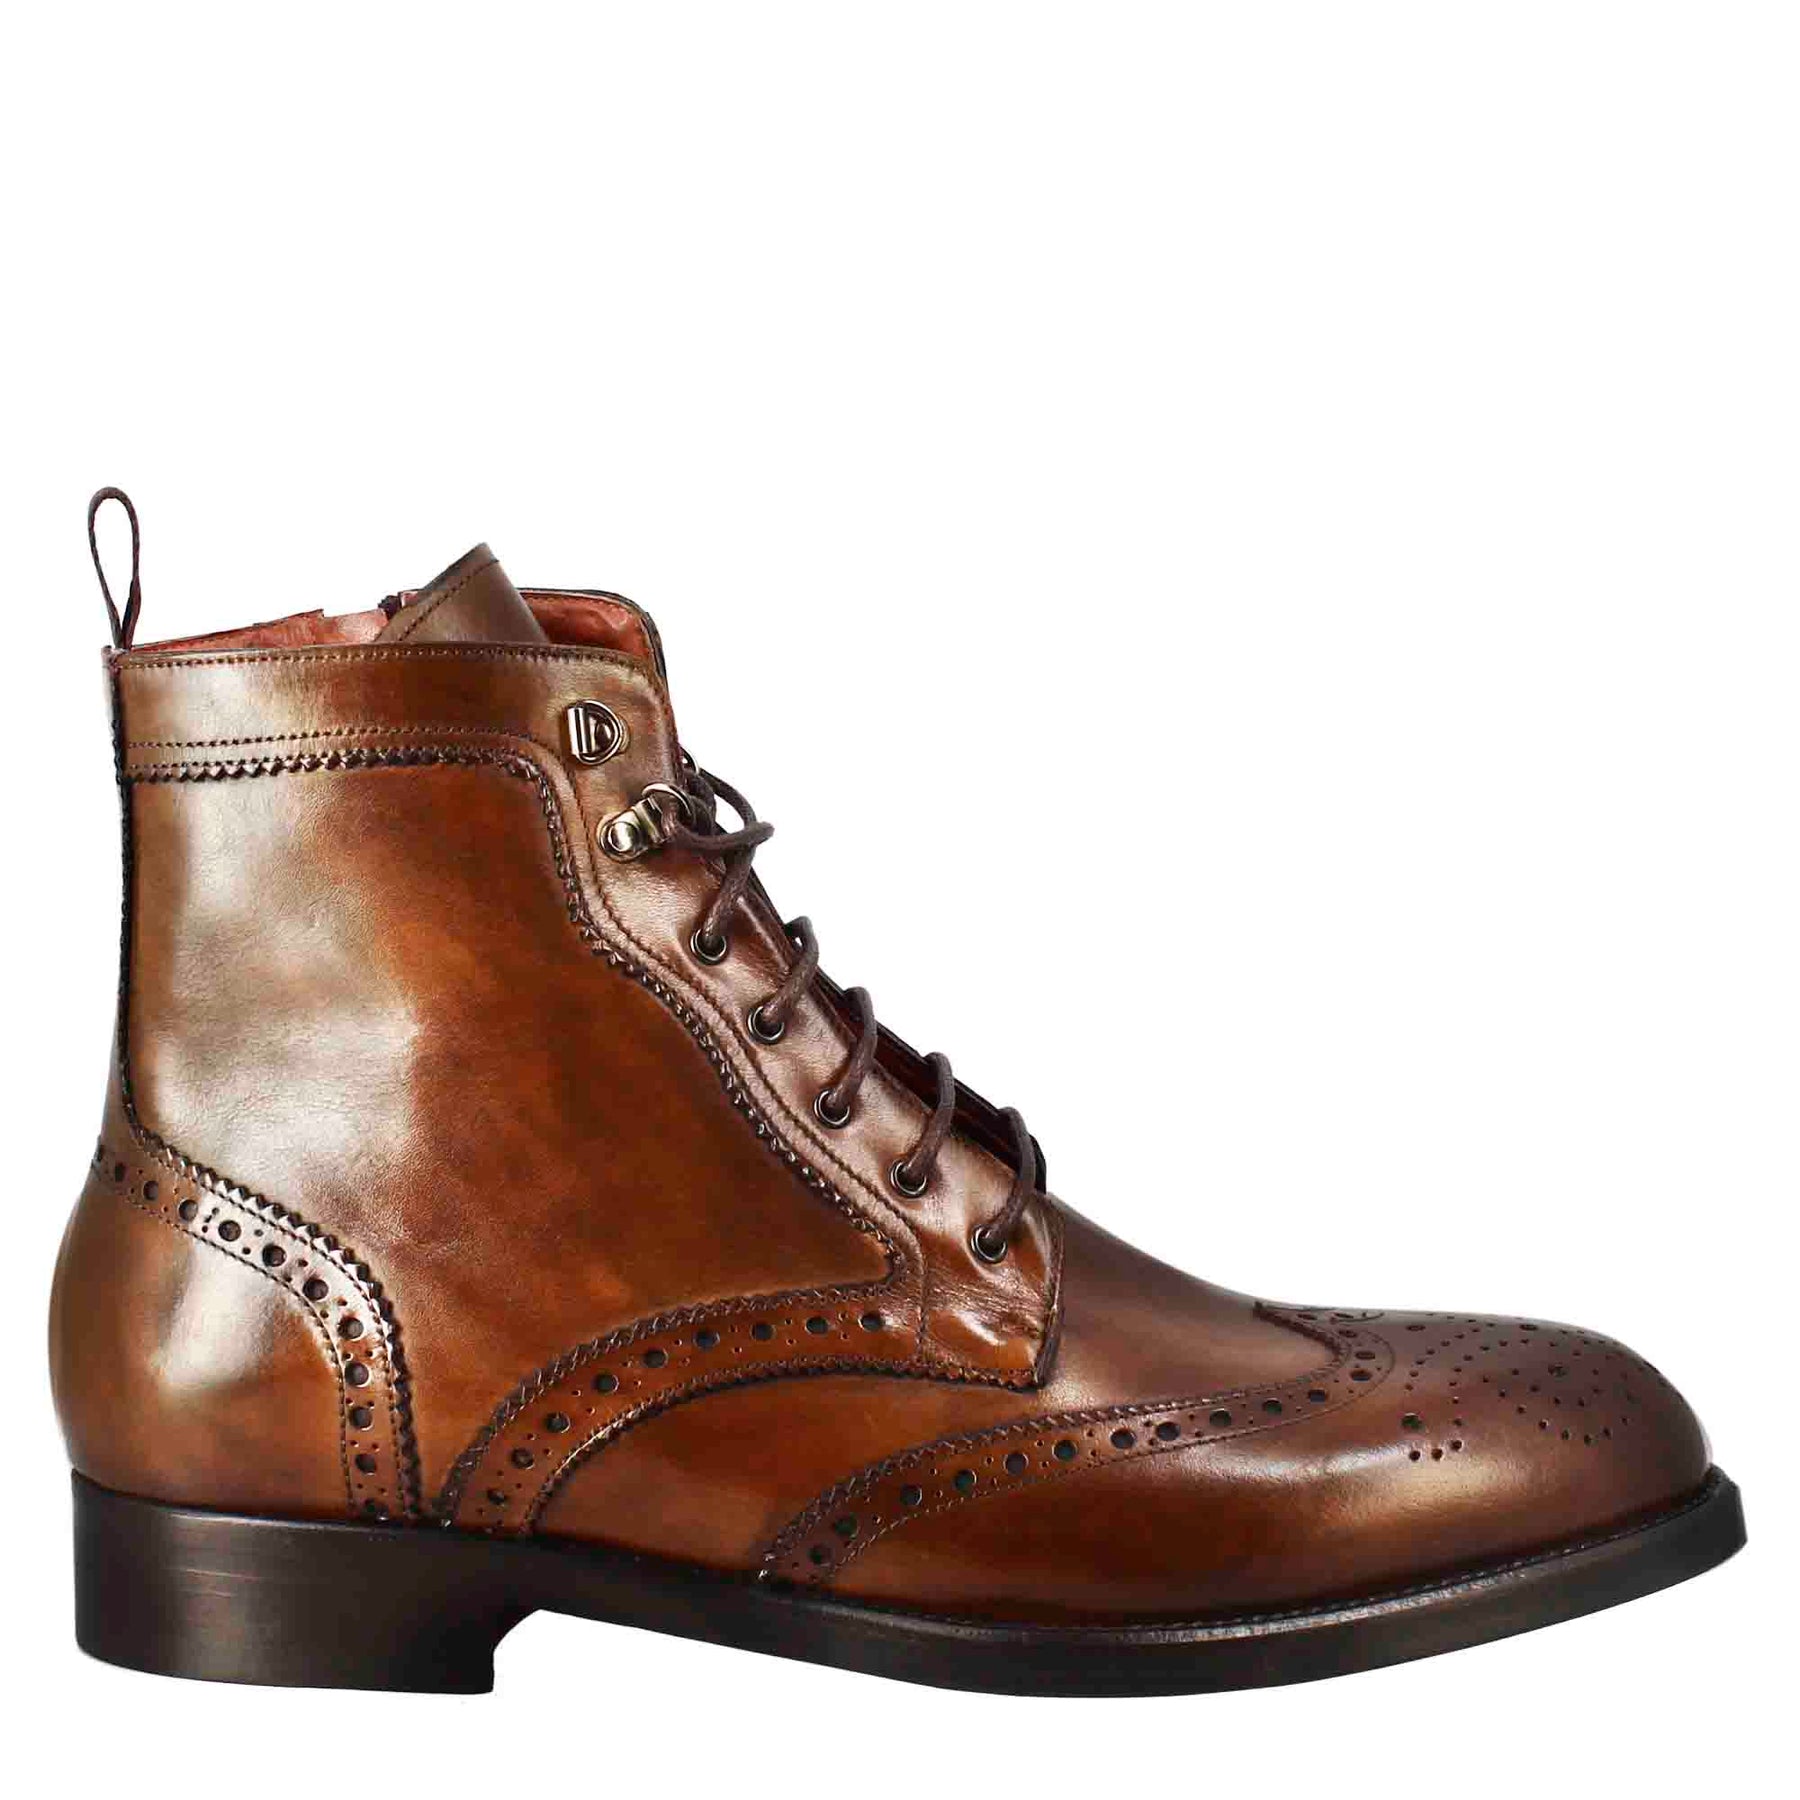 Men's high amphibious brogue boot in tan leather